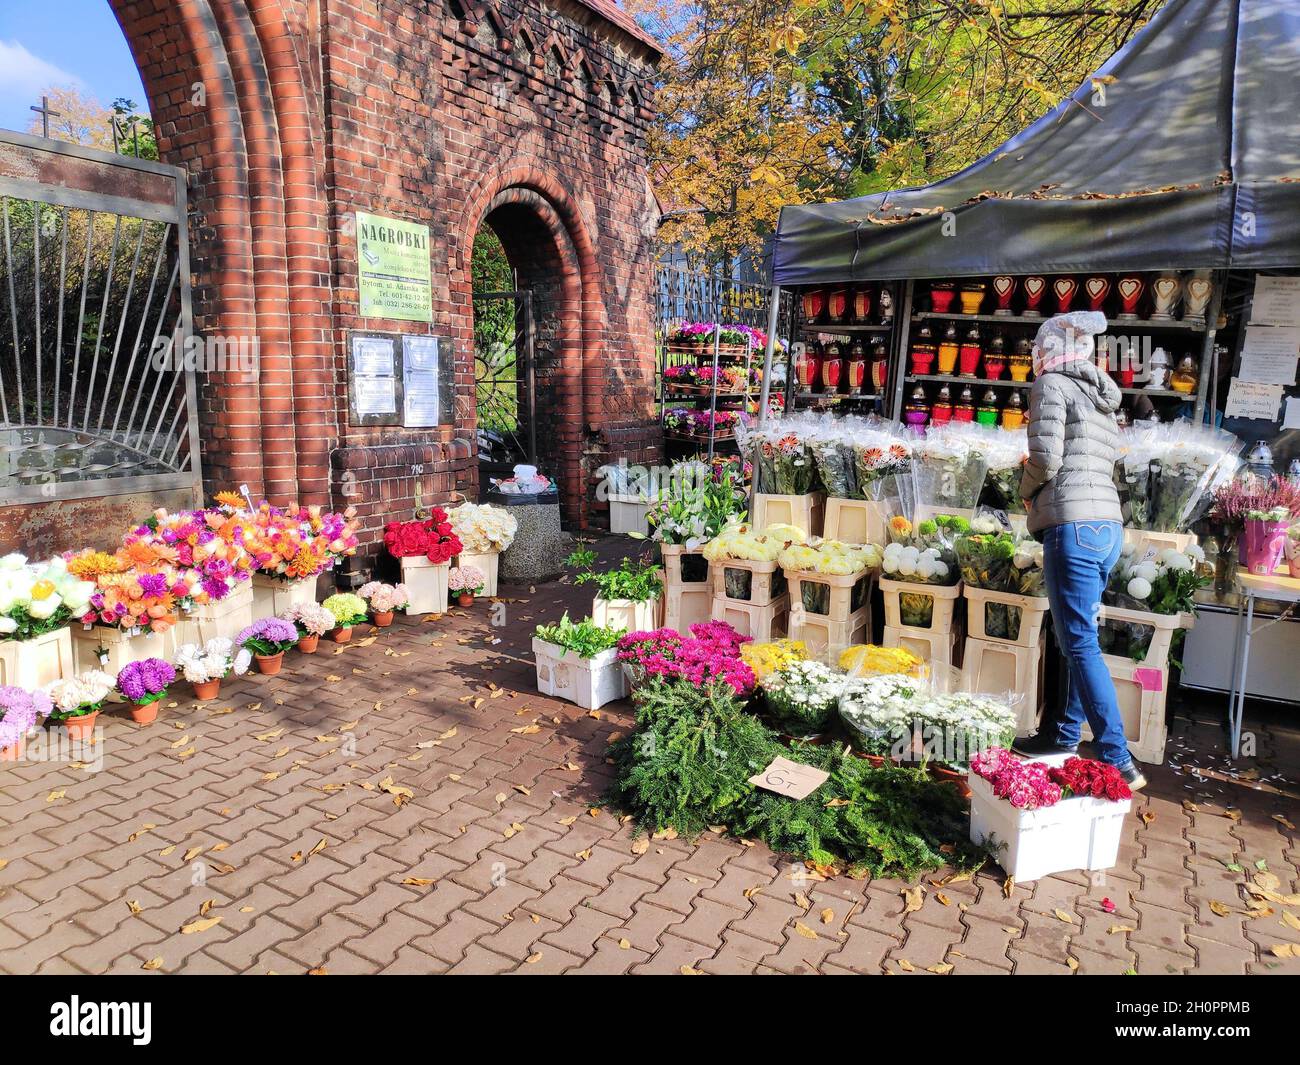 BYTOM, POLAND - OCTOBER 25, 2020: Cemetery candle and artificial flower shop before All Saints Day in Bytom. All Saints Day celebration at cemeteries Stock Photo